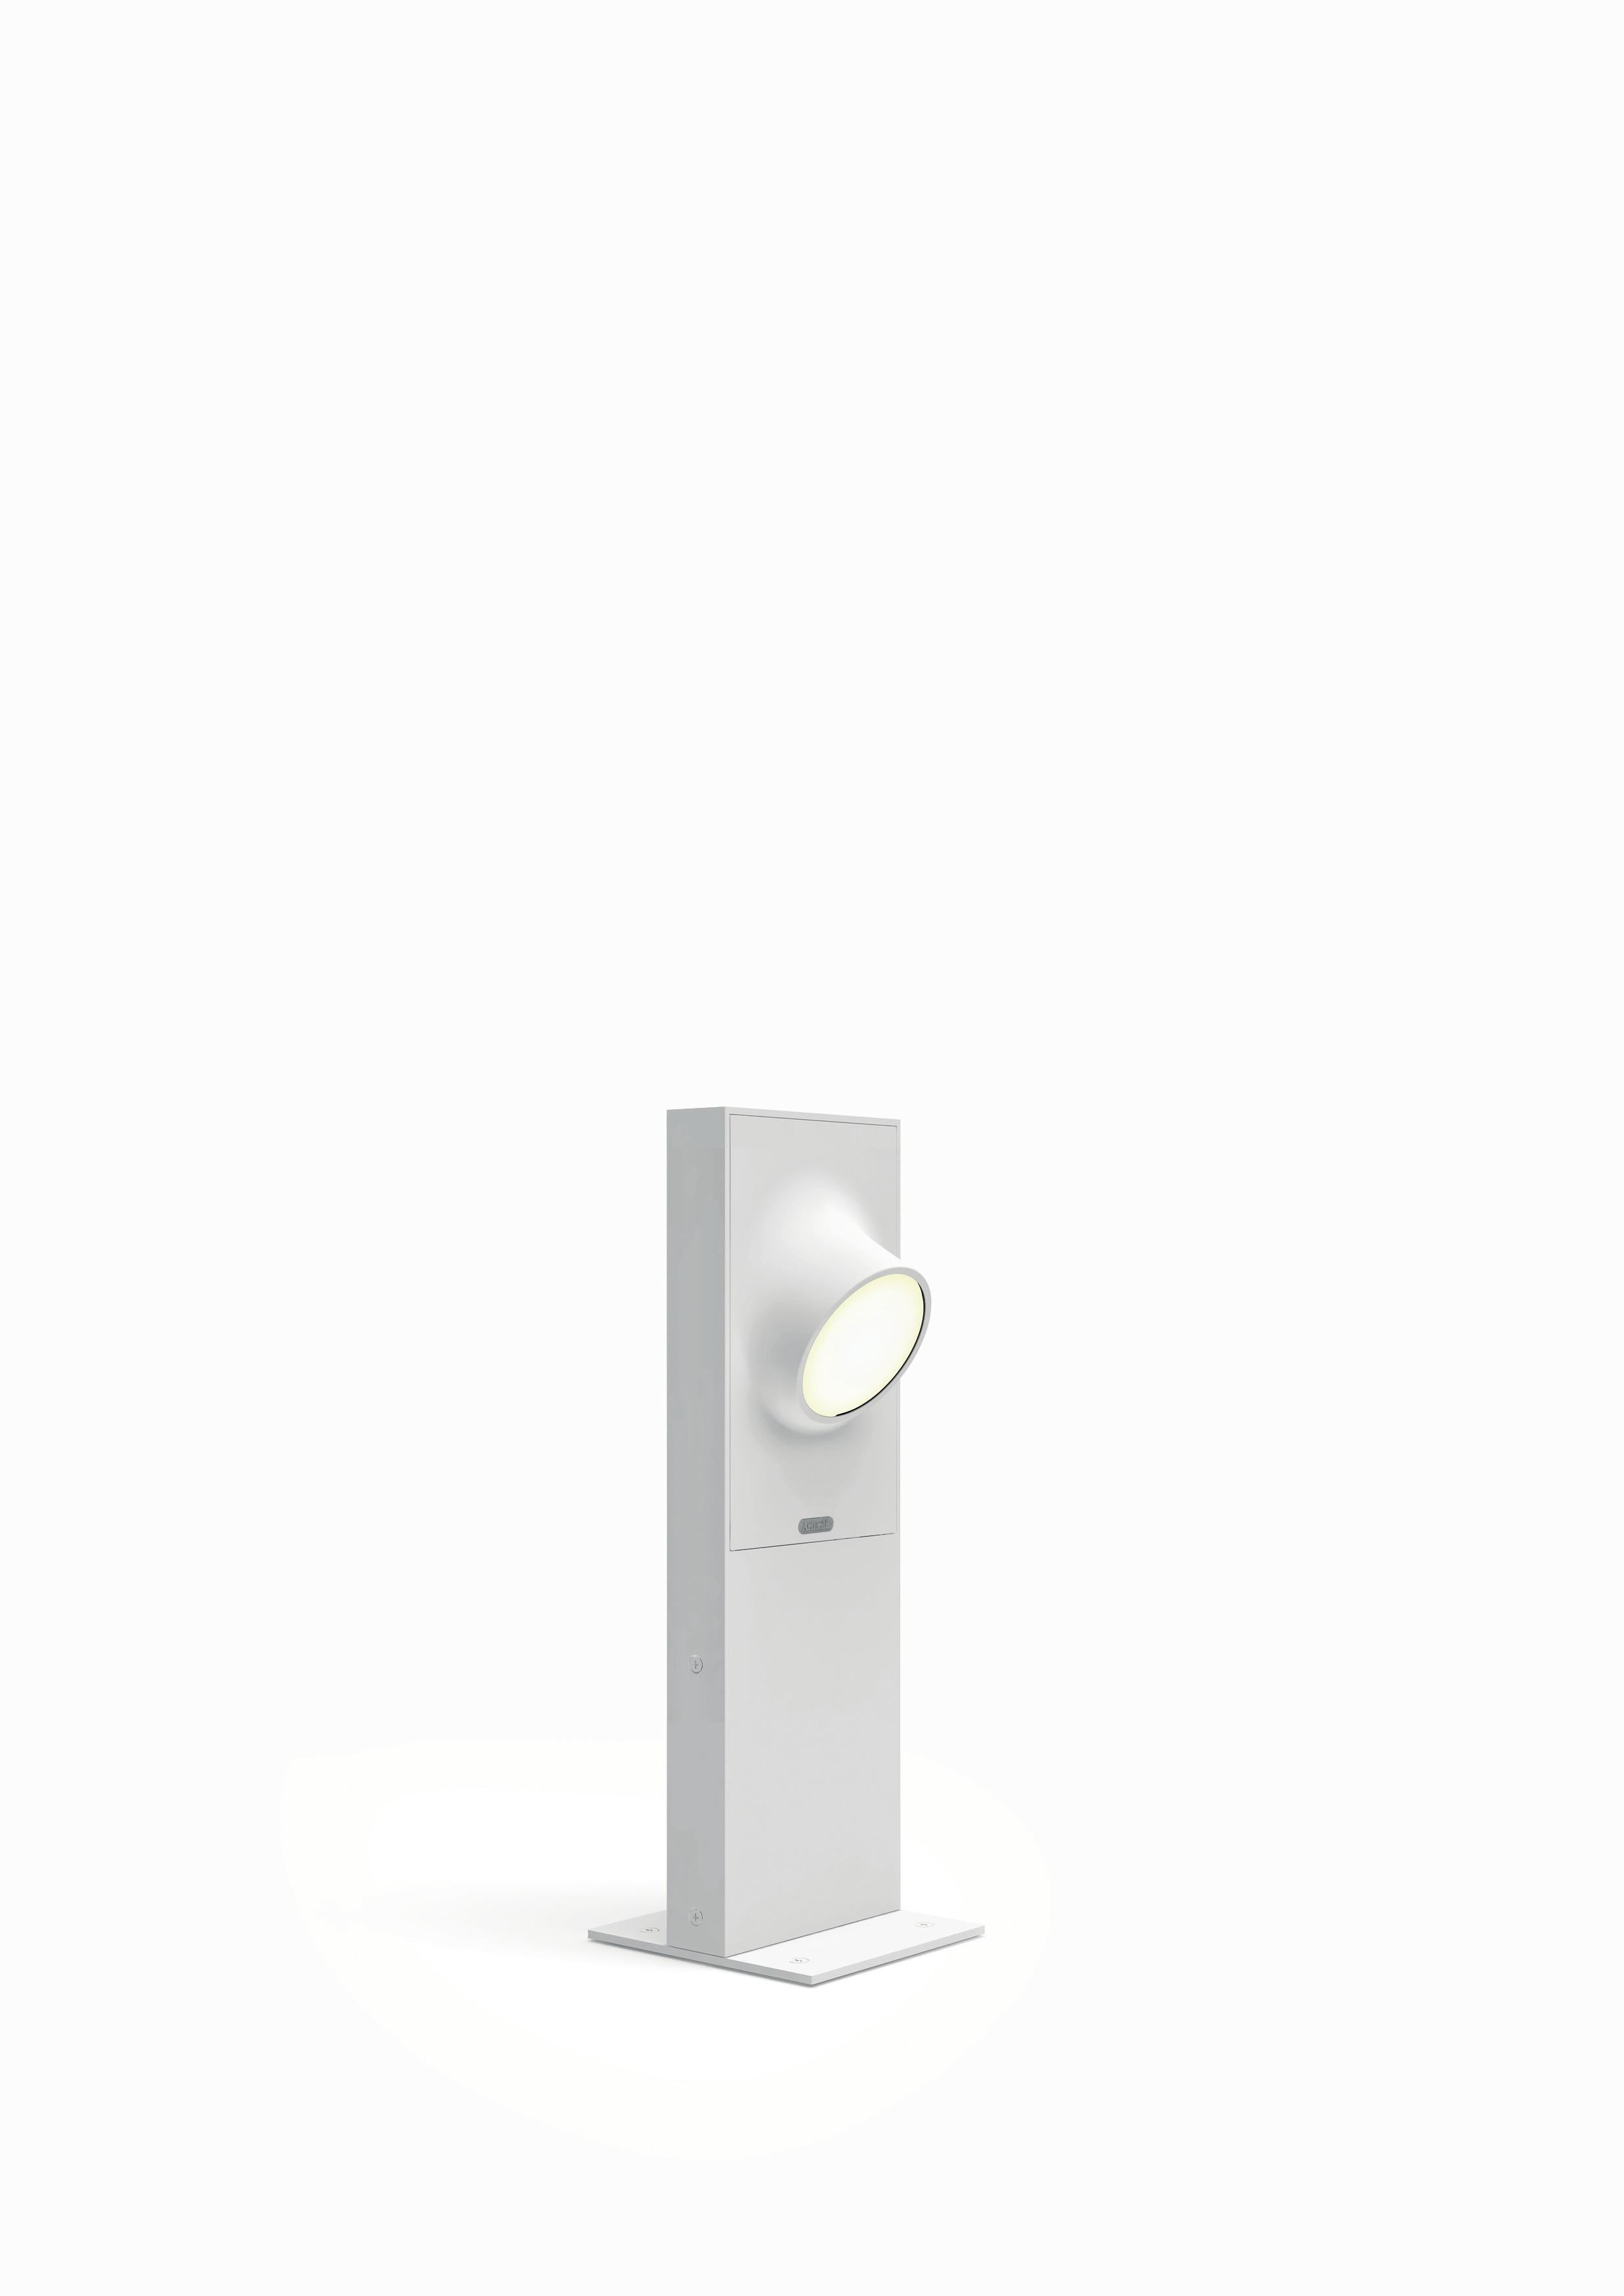 An eye of outdoor light for pathways, Ciclope is available in wall and floor models, in various sizes and finishes, emitting unilateral or bilateral light. 

The Ciclope family enhances any outdoor space with simple design and high-efficient